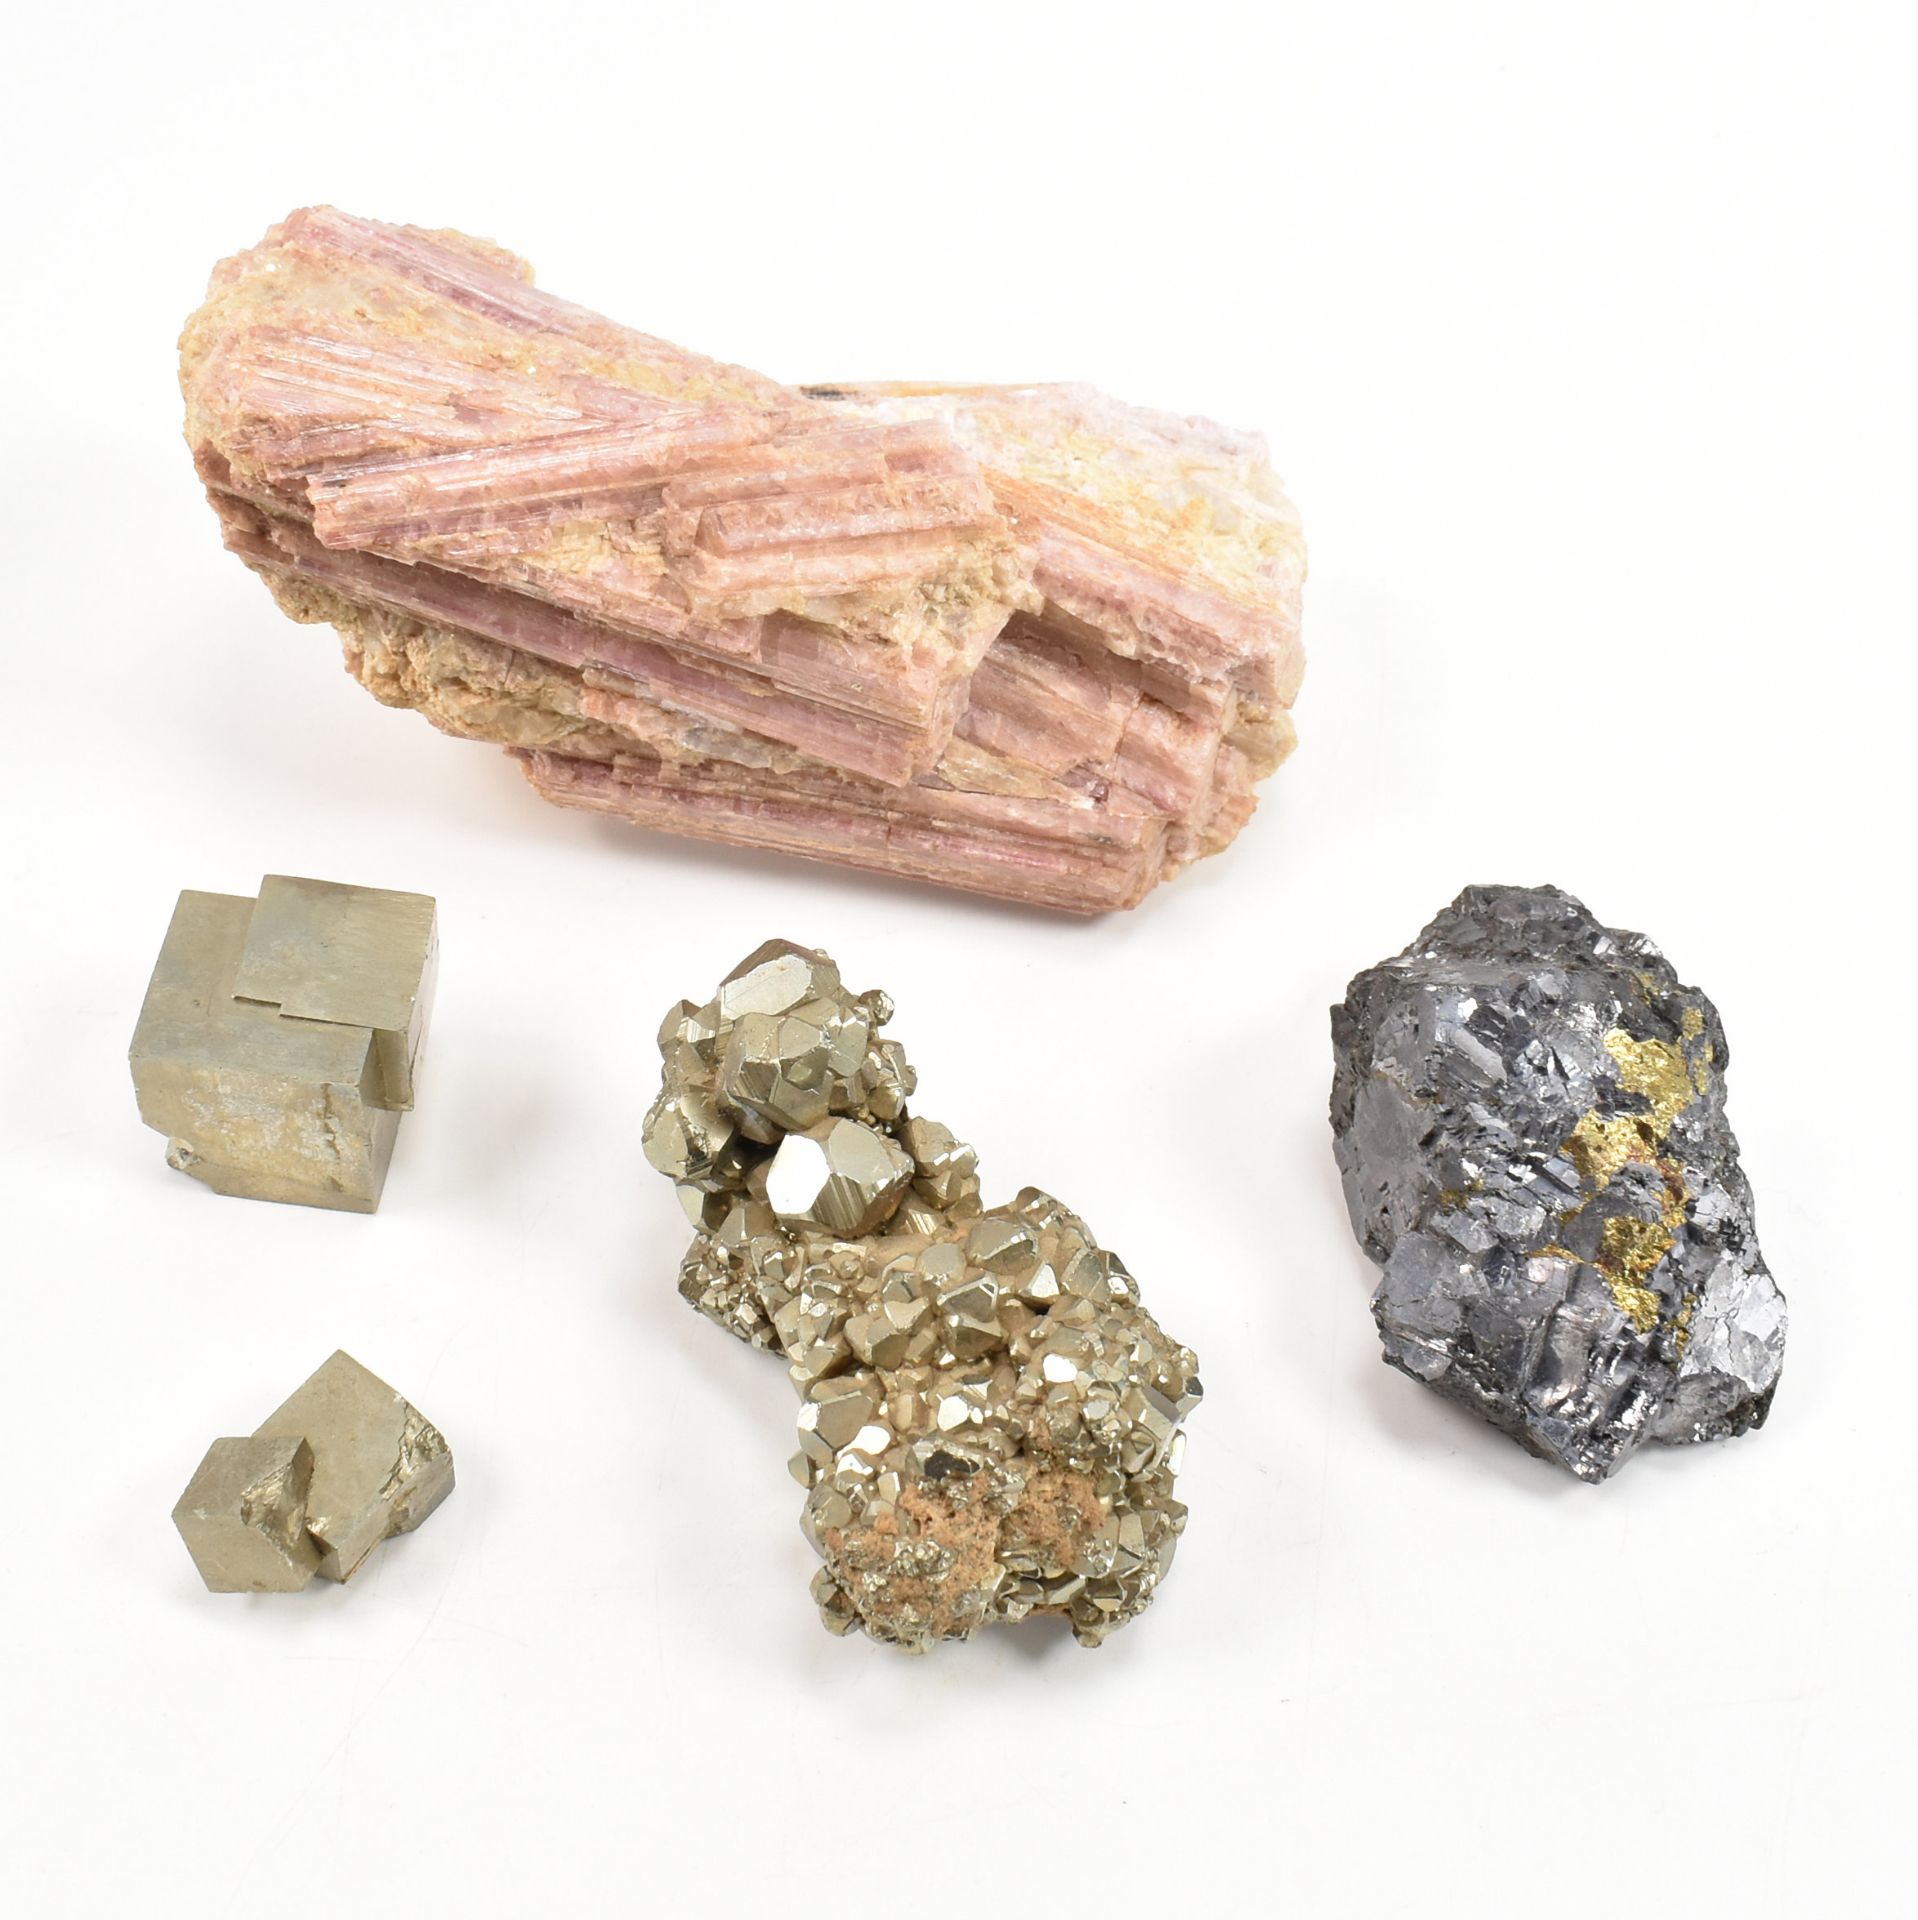 NATURAL HISTORY - PYRITE & ASSORTED MINERAL SPECIMENS